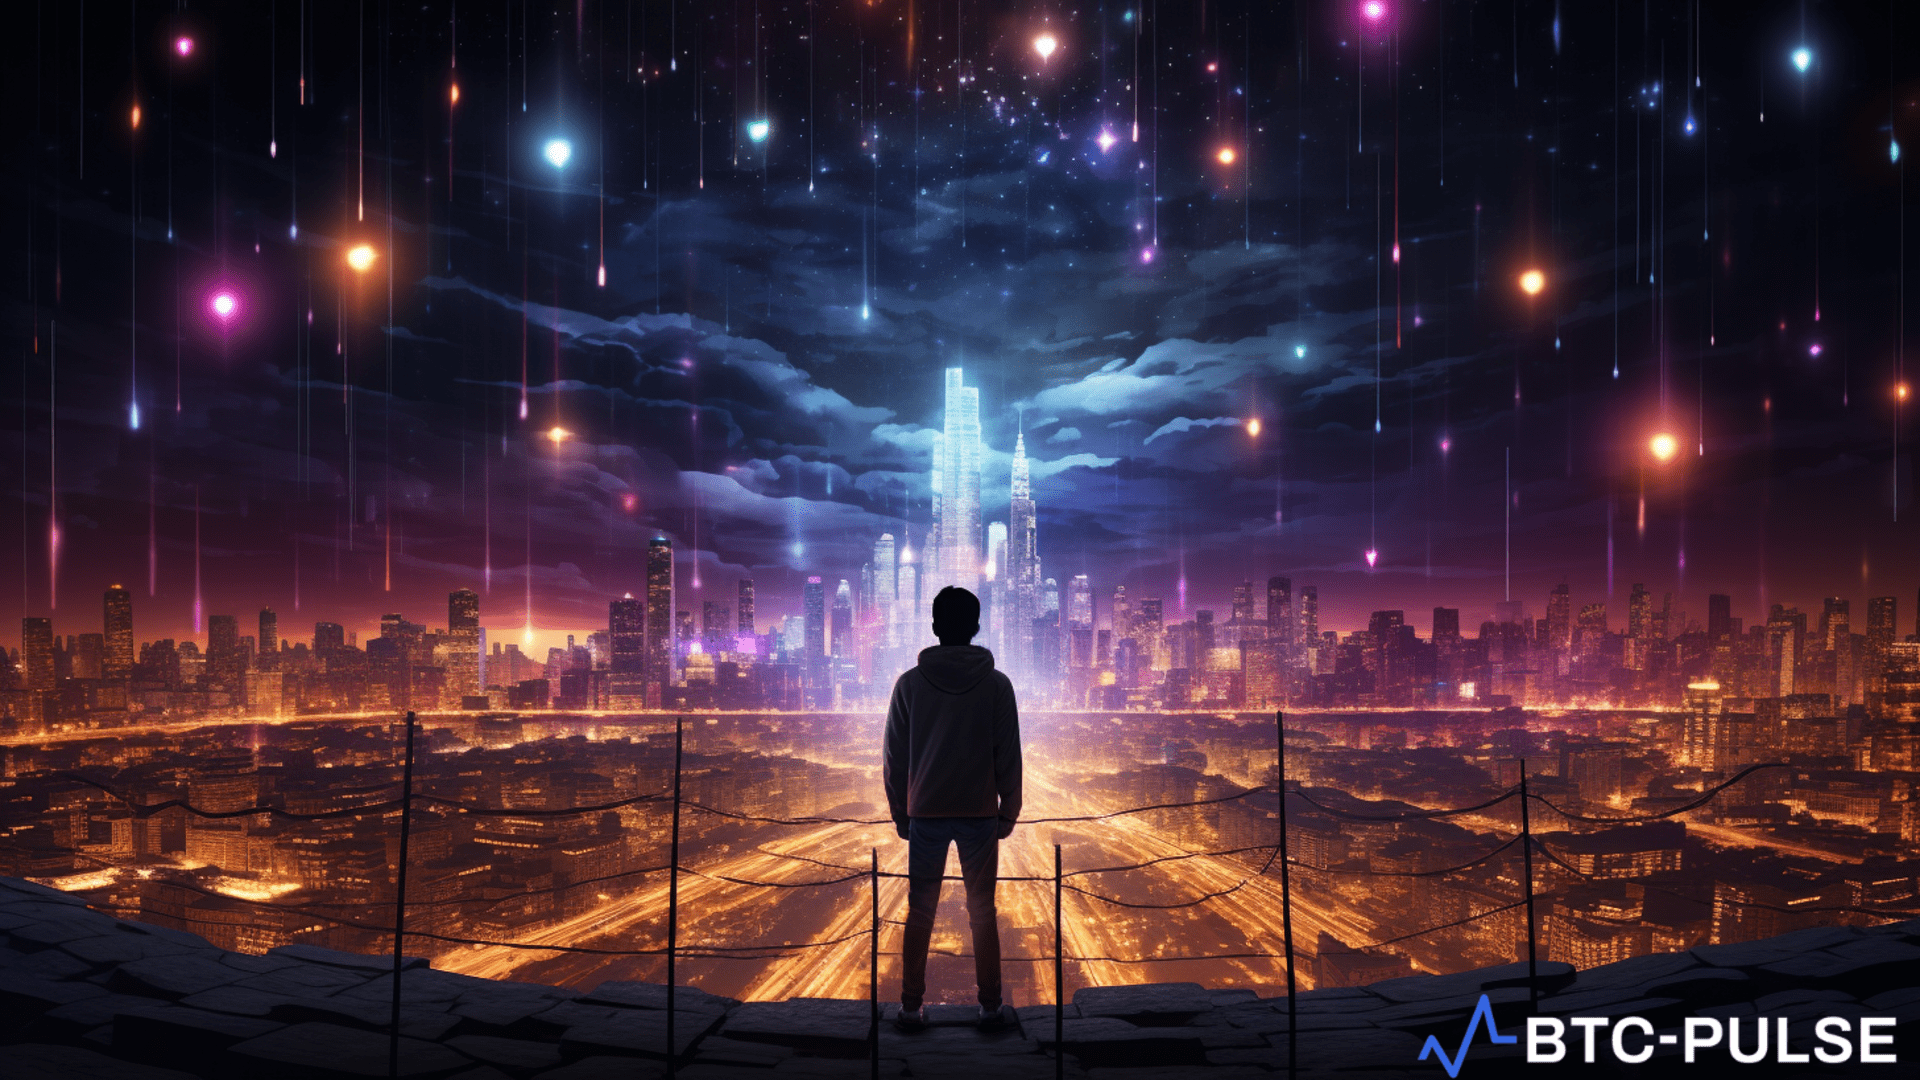 Concept art for 'New Here,' a film about exploring digital art through crypto, produced by Shane Boris.